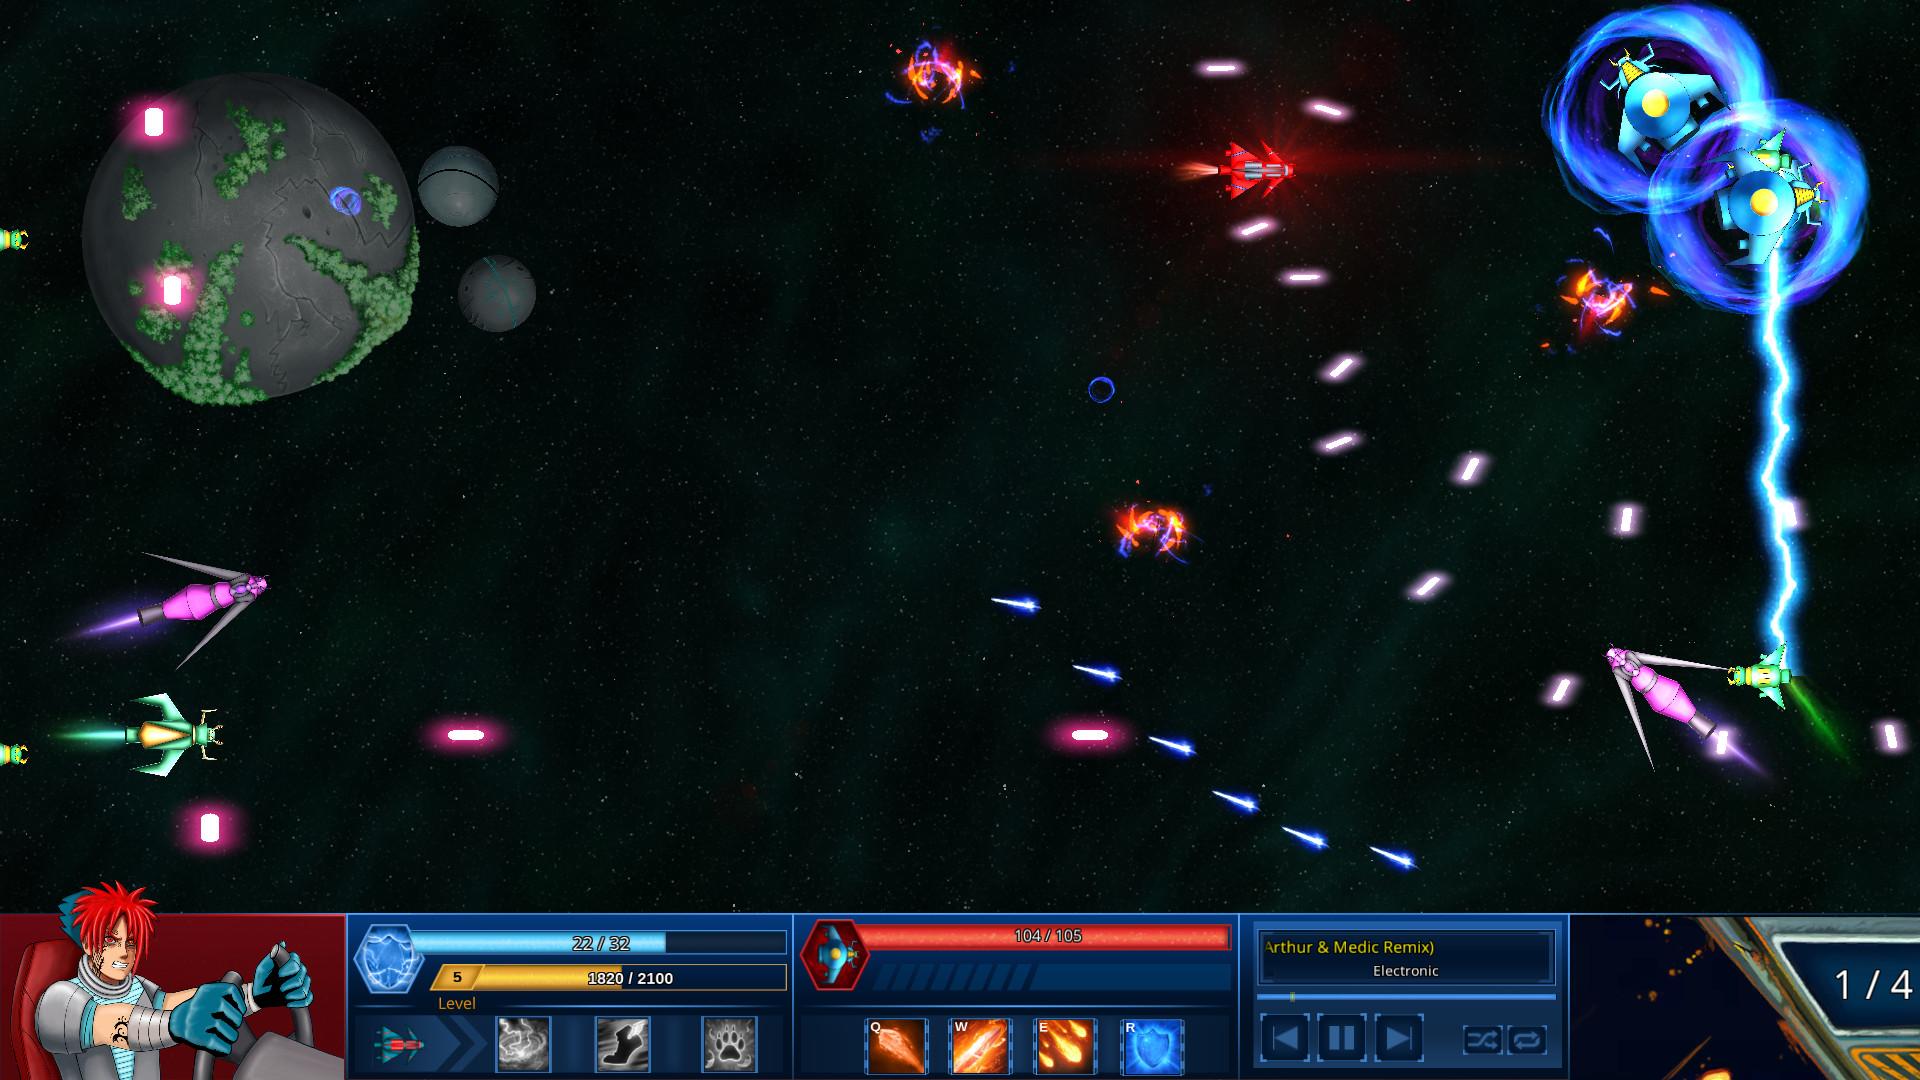 Screenshot №24 from game Survive in Space